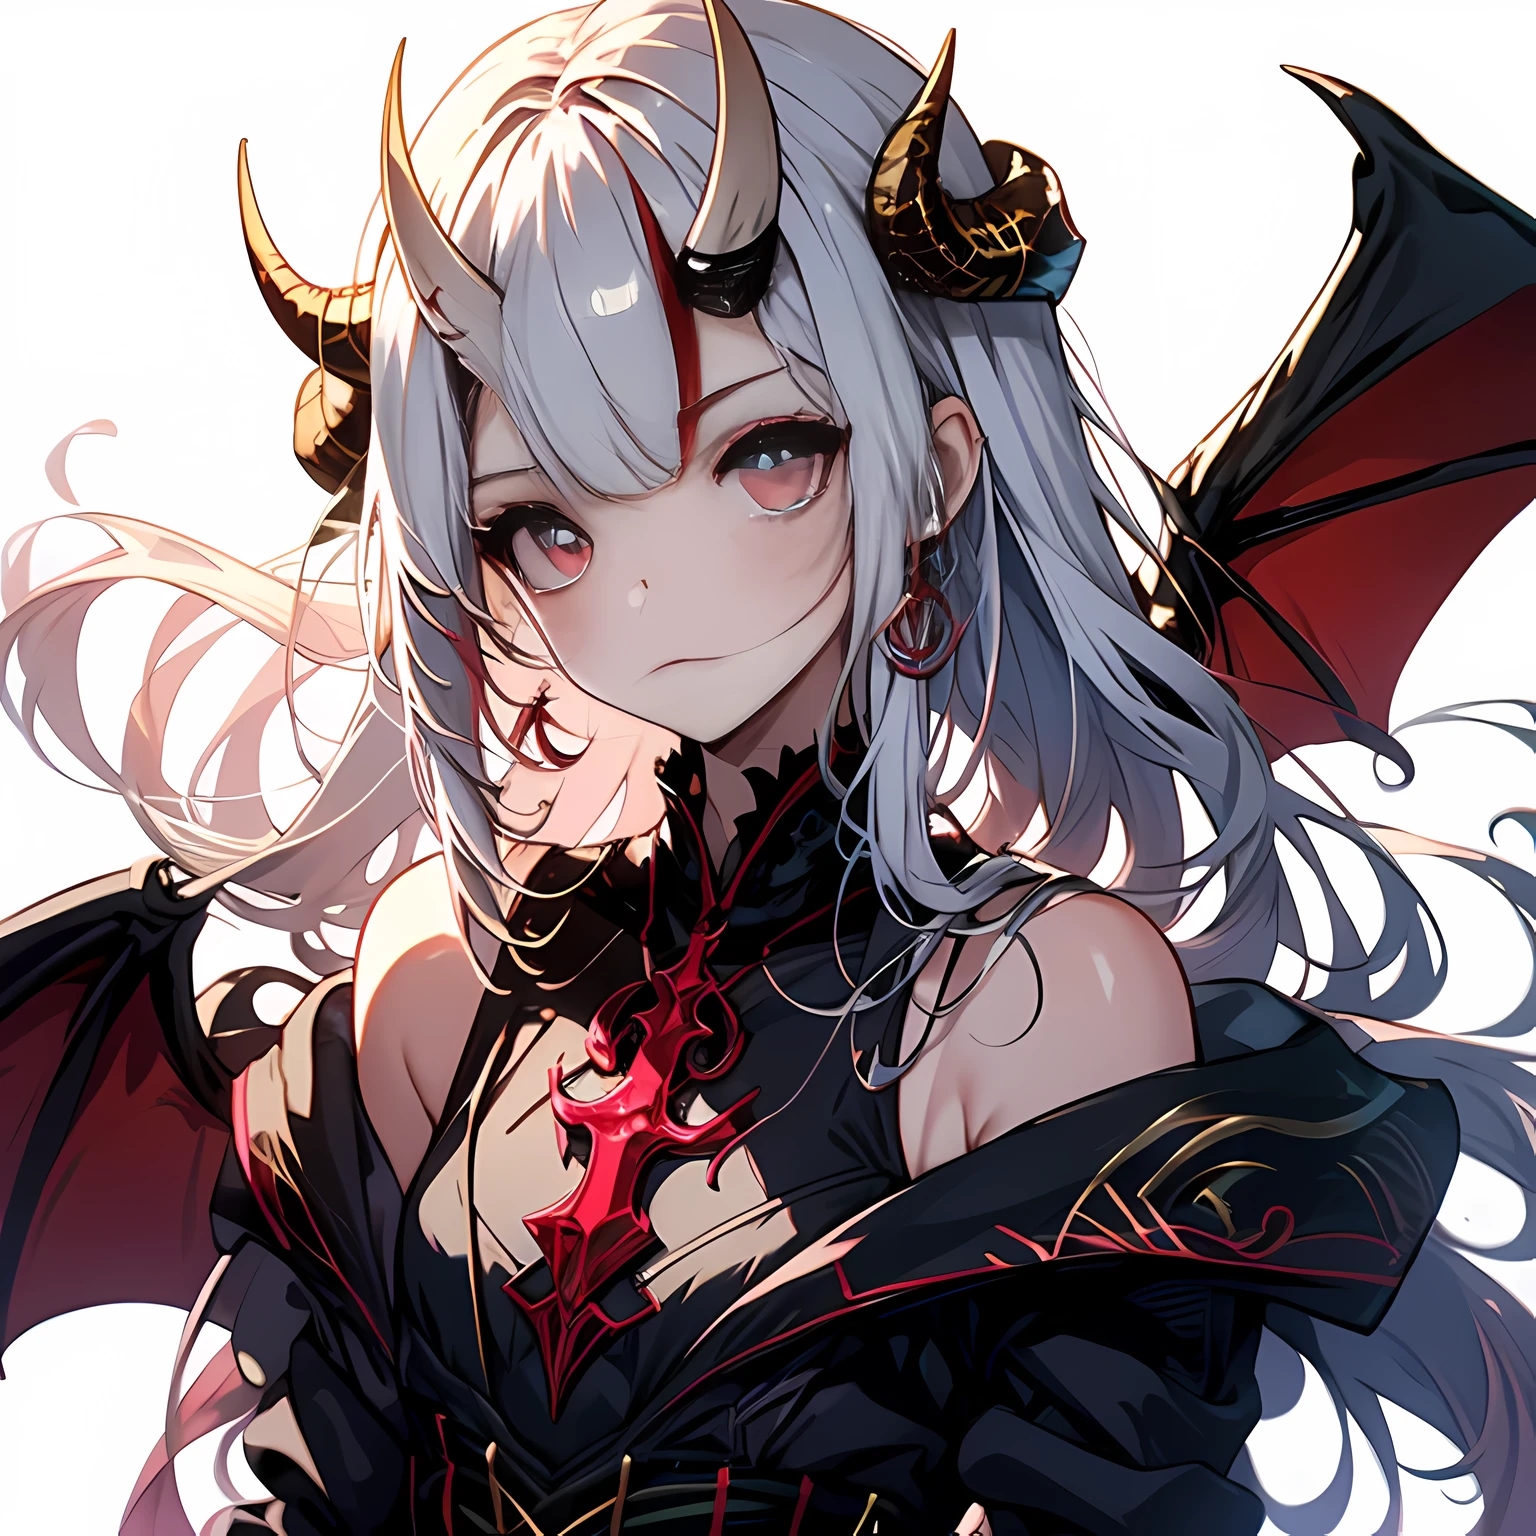 1 boy, alone, Super exquisite illustrations, extremely delicate and beautiful, best quality, devil horns, Demon Wings, young, dark and sinister, Noble costumes, White background, intense gaze, intricate details, otherworldly, fantasy.